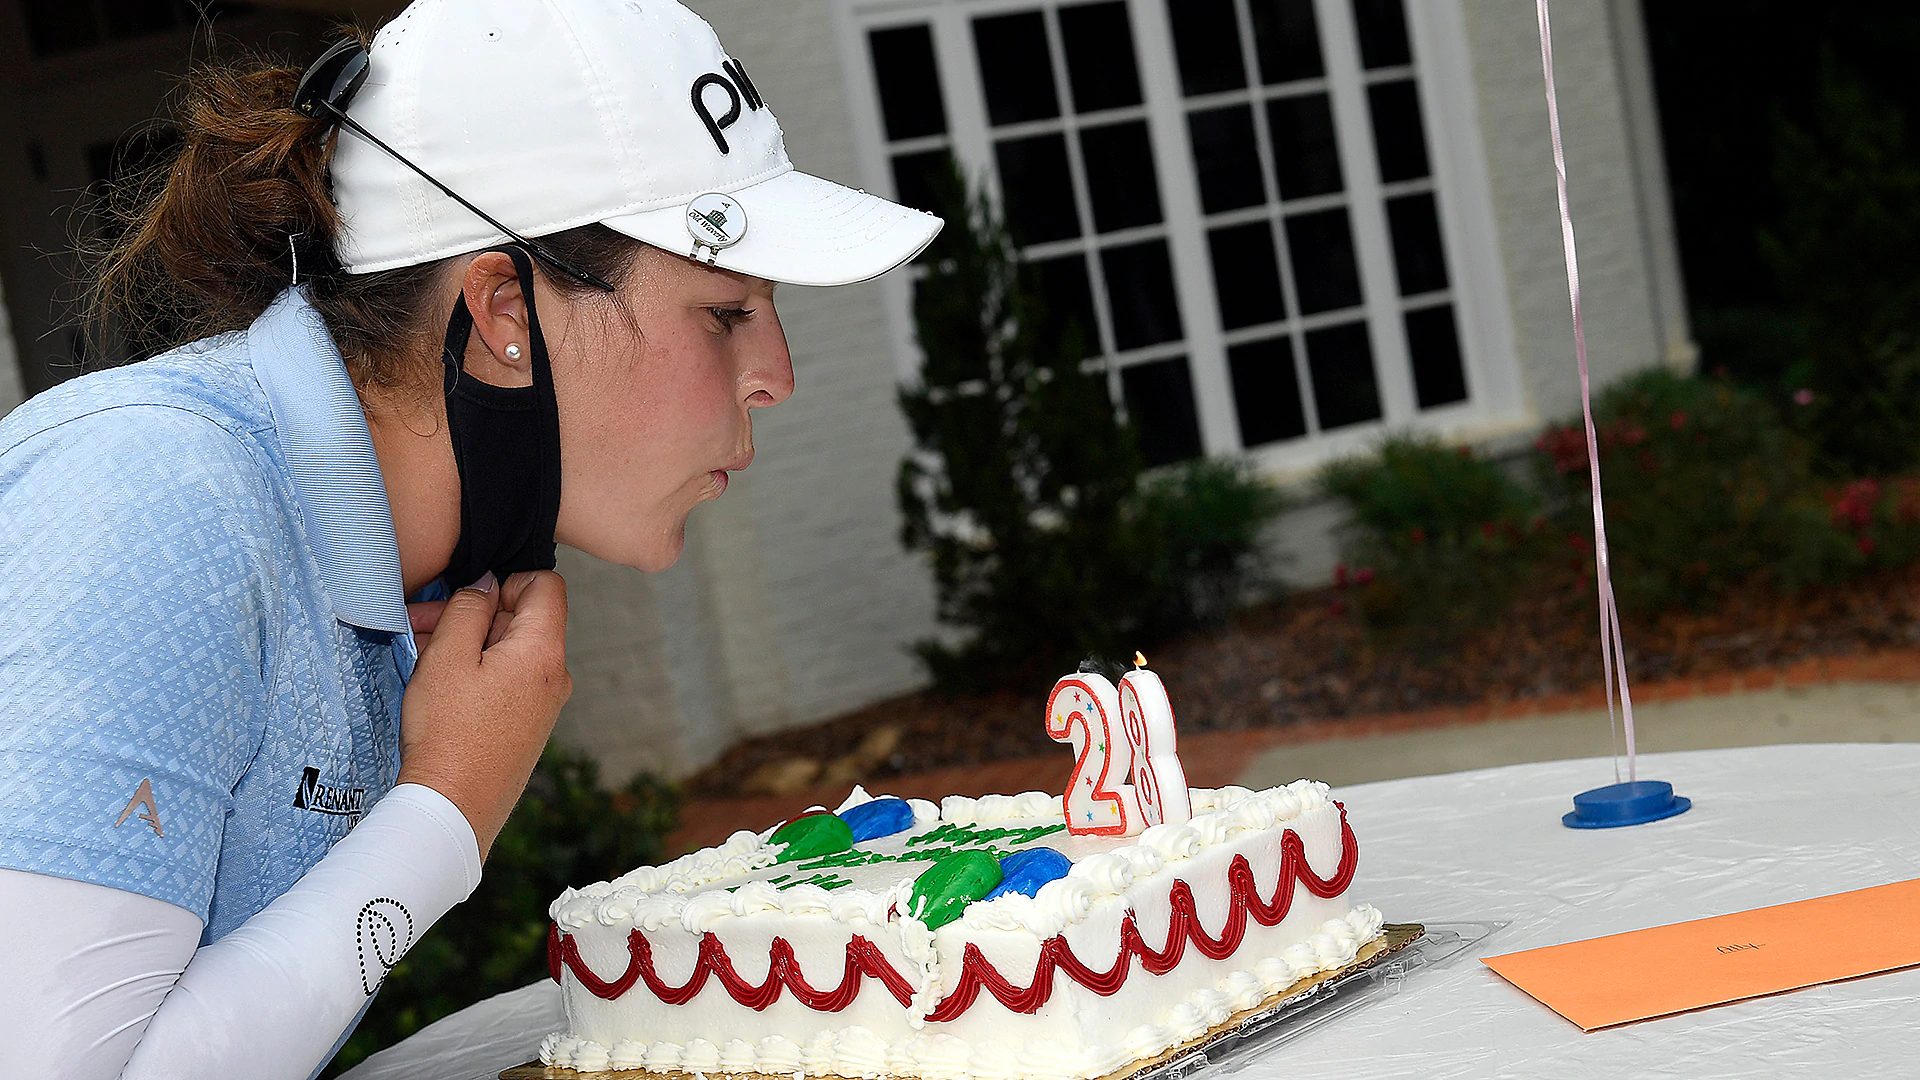 Ally McDonald celebrates birthday with first LPGA win at Drive On – Reynolds